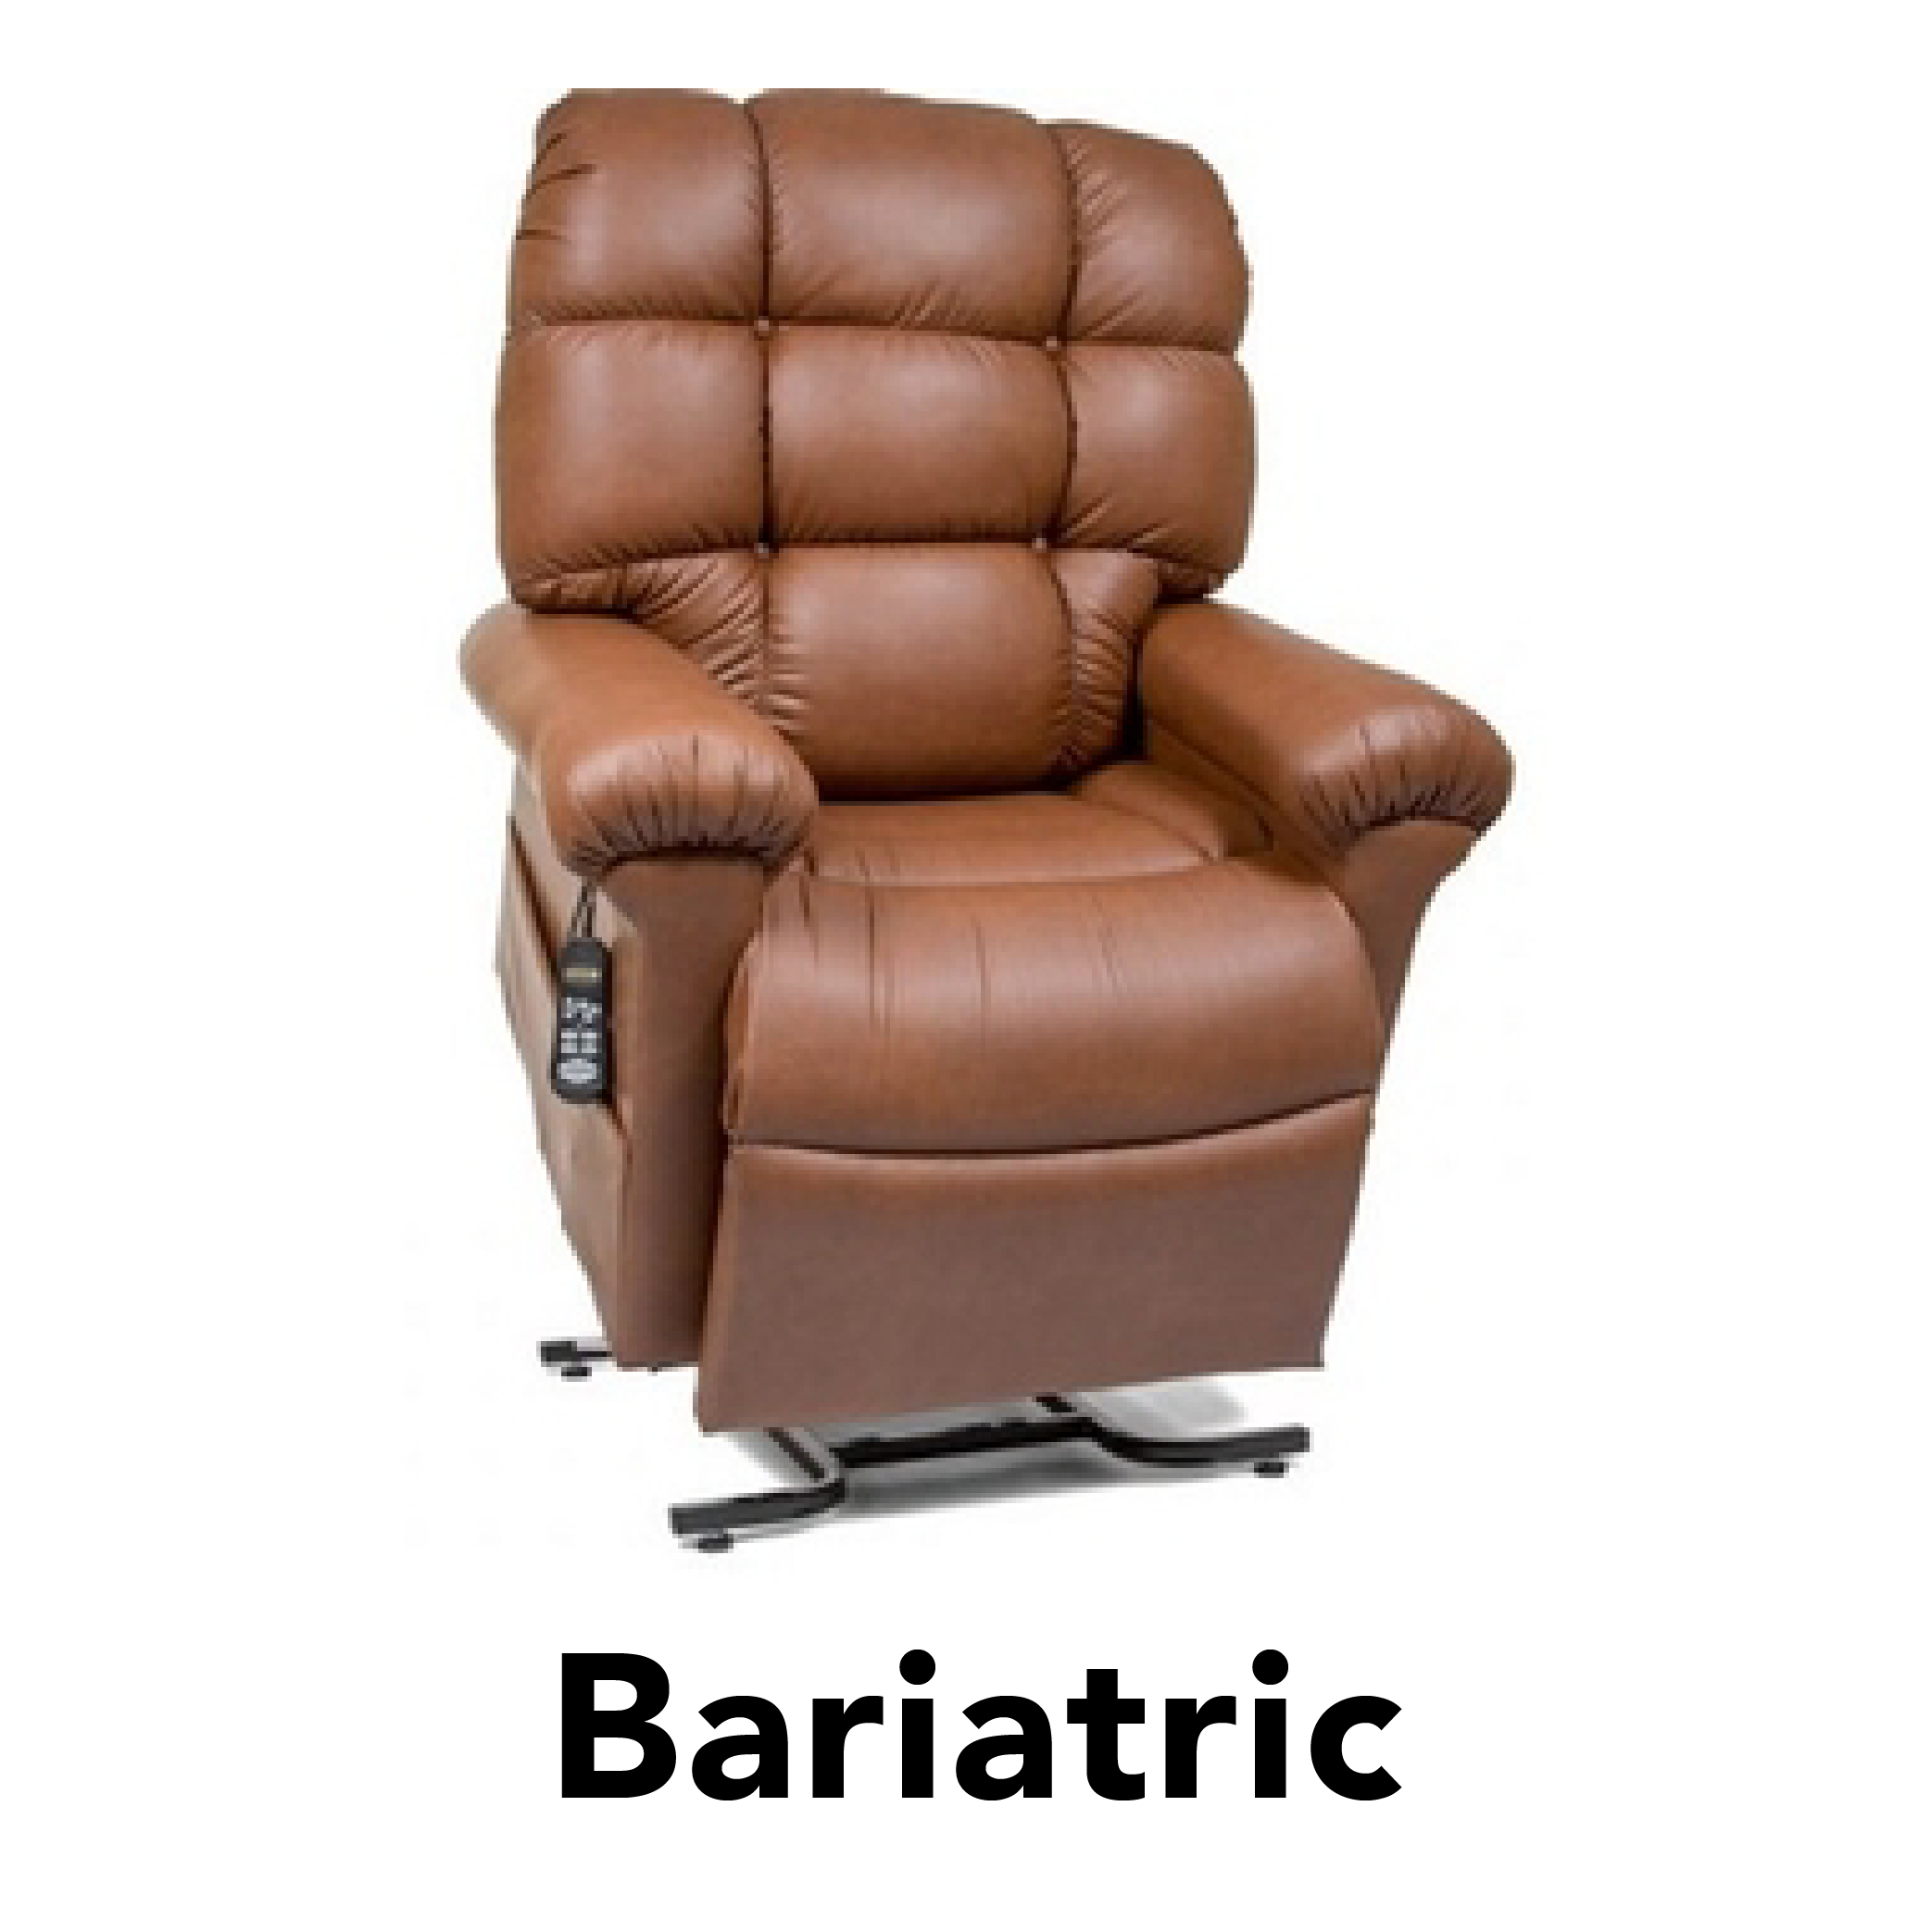 bariatric or heavy weight capacity lift chairs category